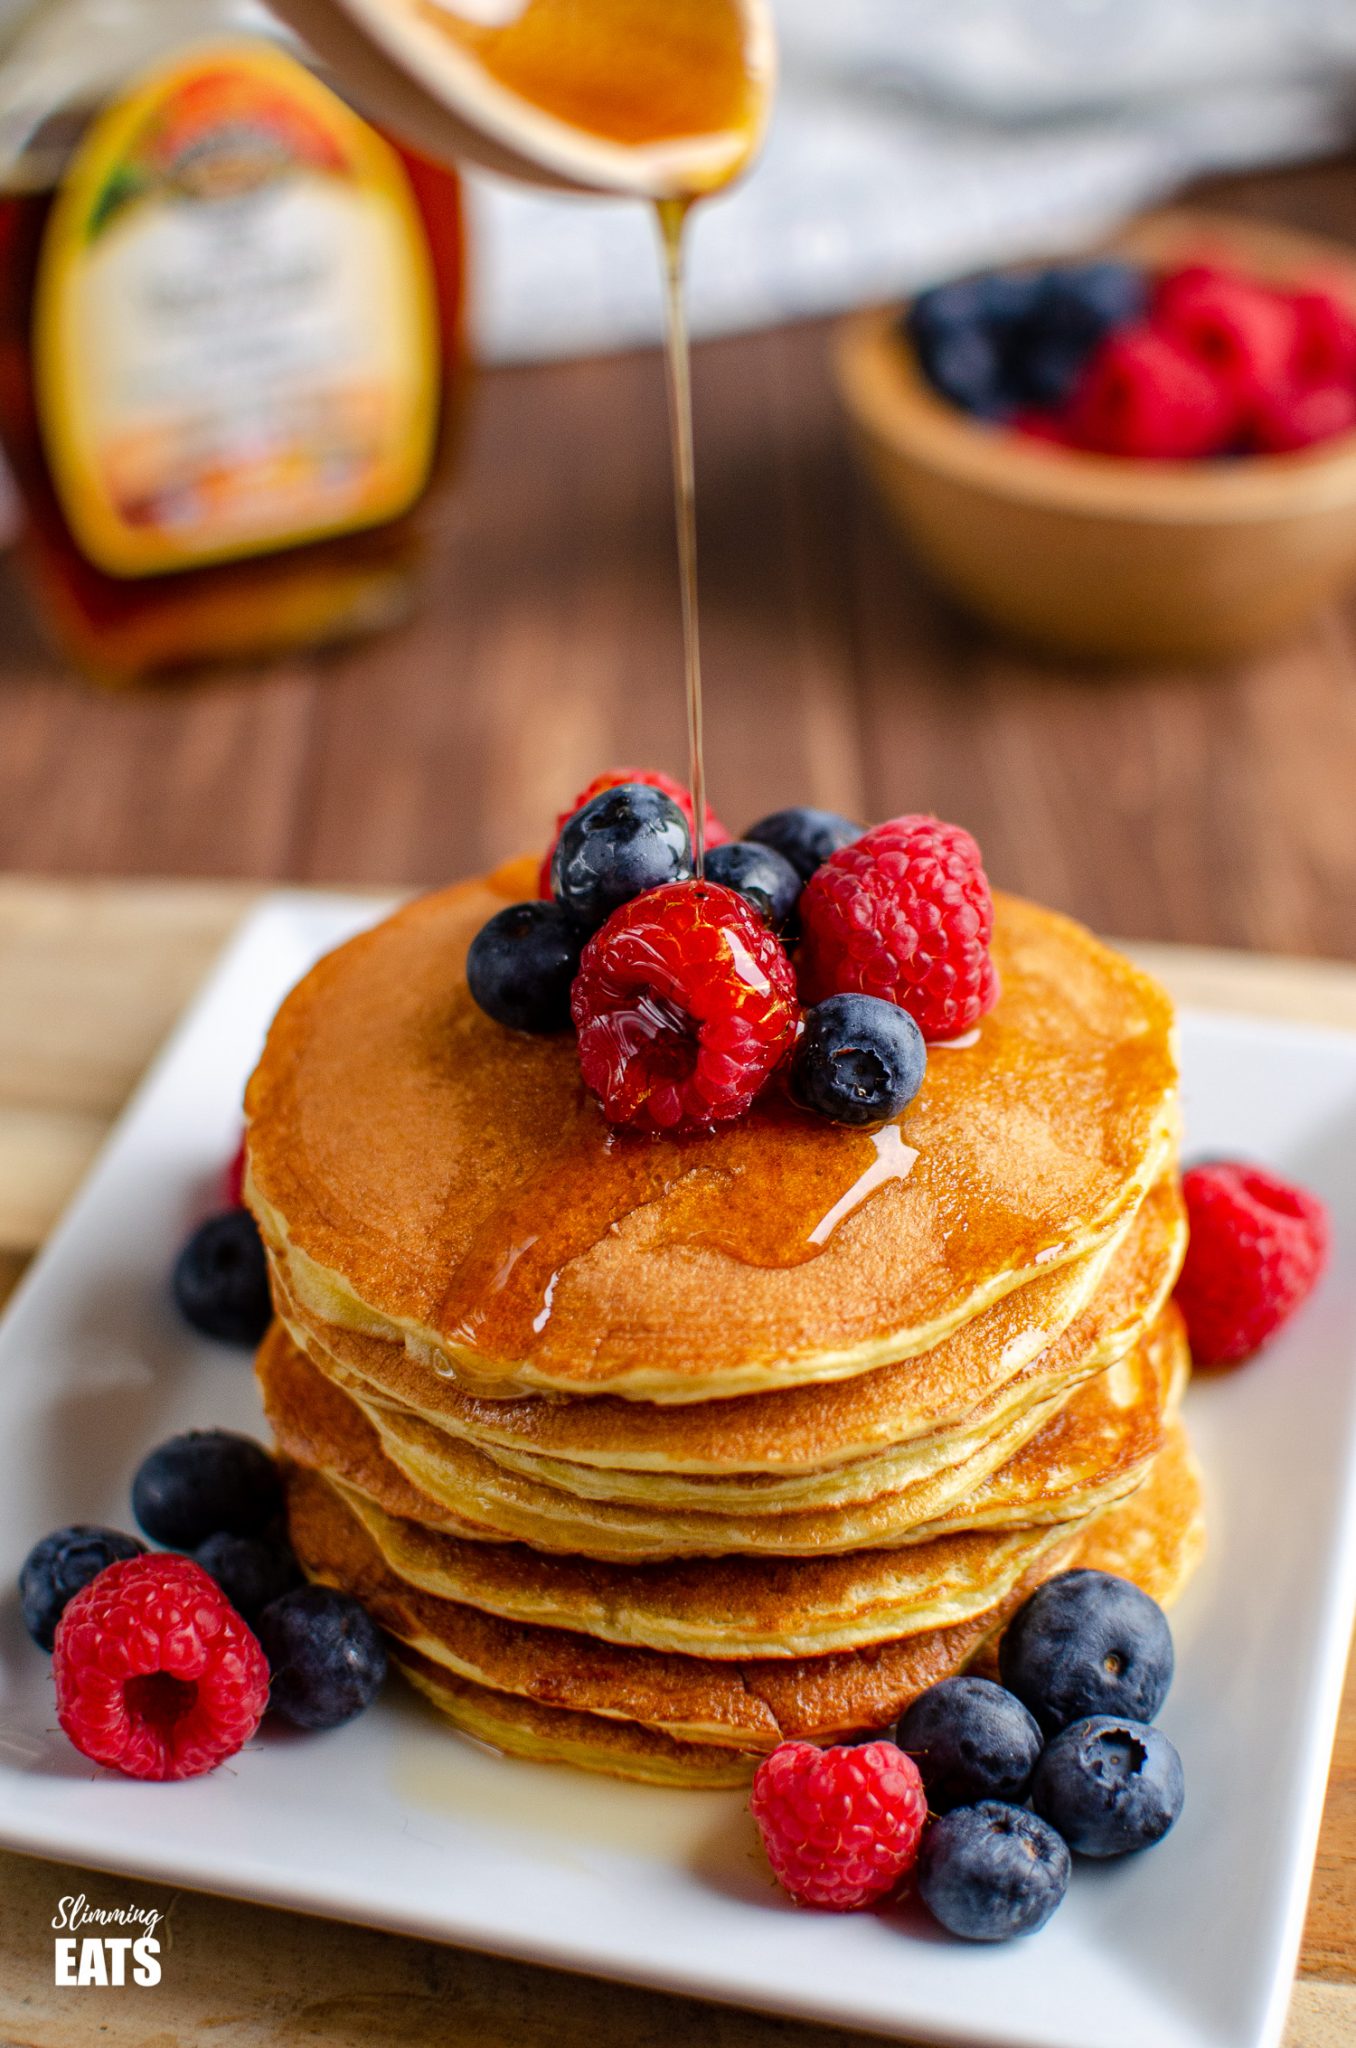 maple syrup being drizzled on American Style Pancakes on white plate with fruit, maple syrup bottle in background